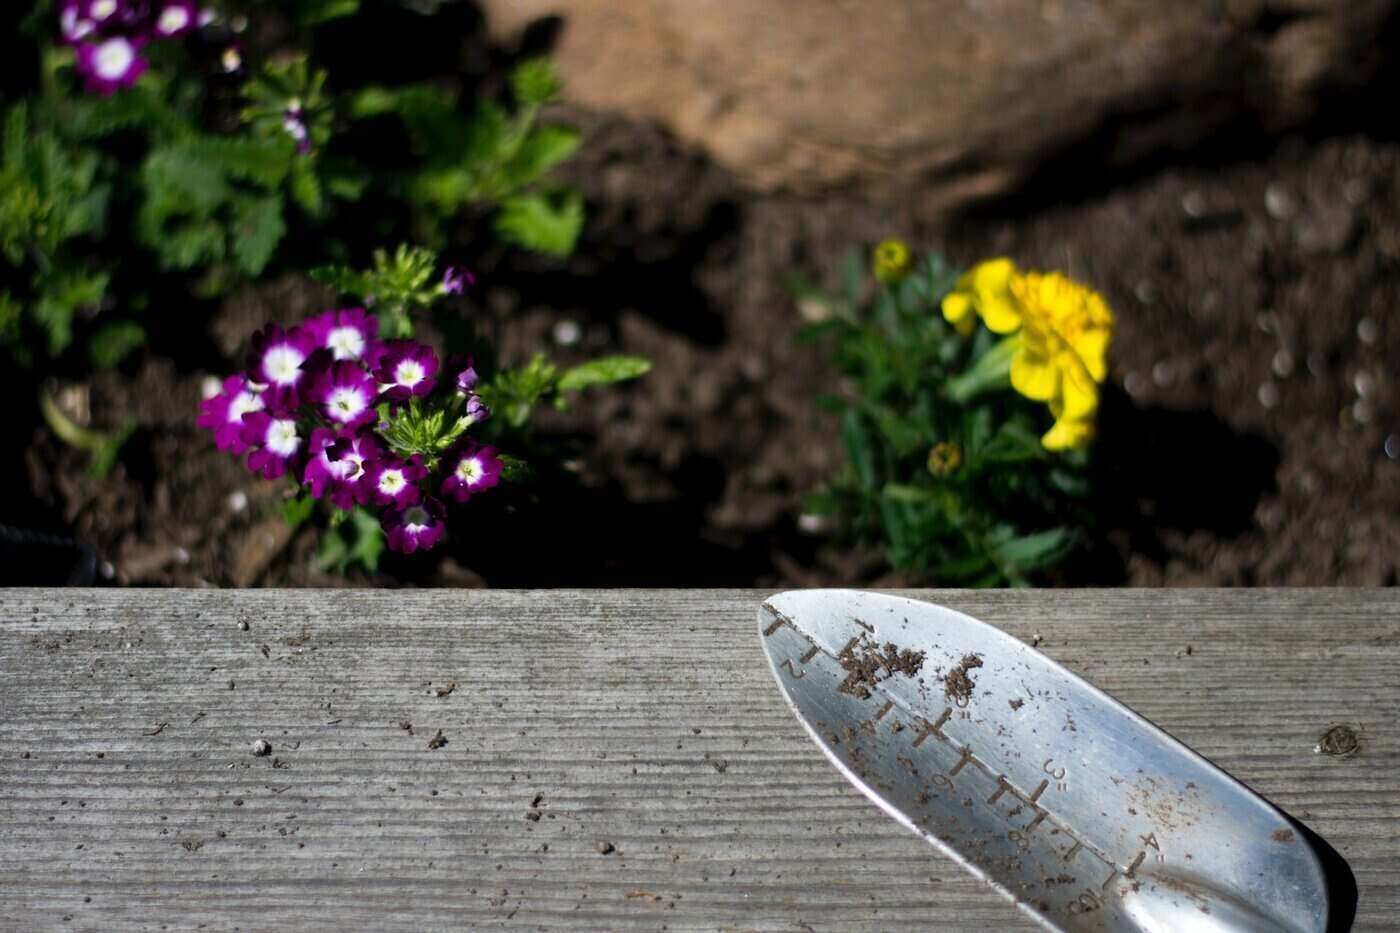 raised garden bed with flowers and trowel on ledge - preparing a garden bed